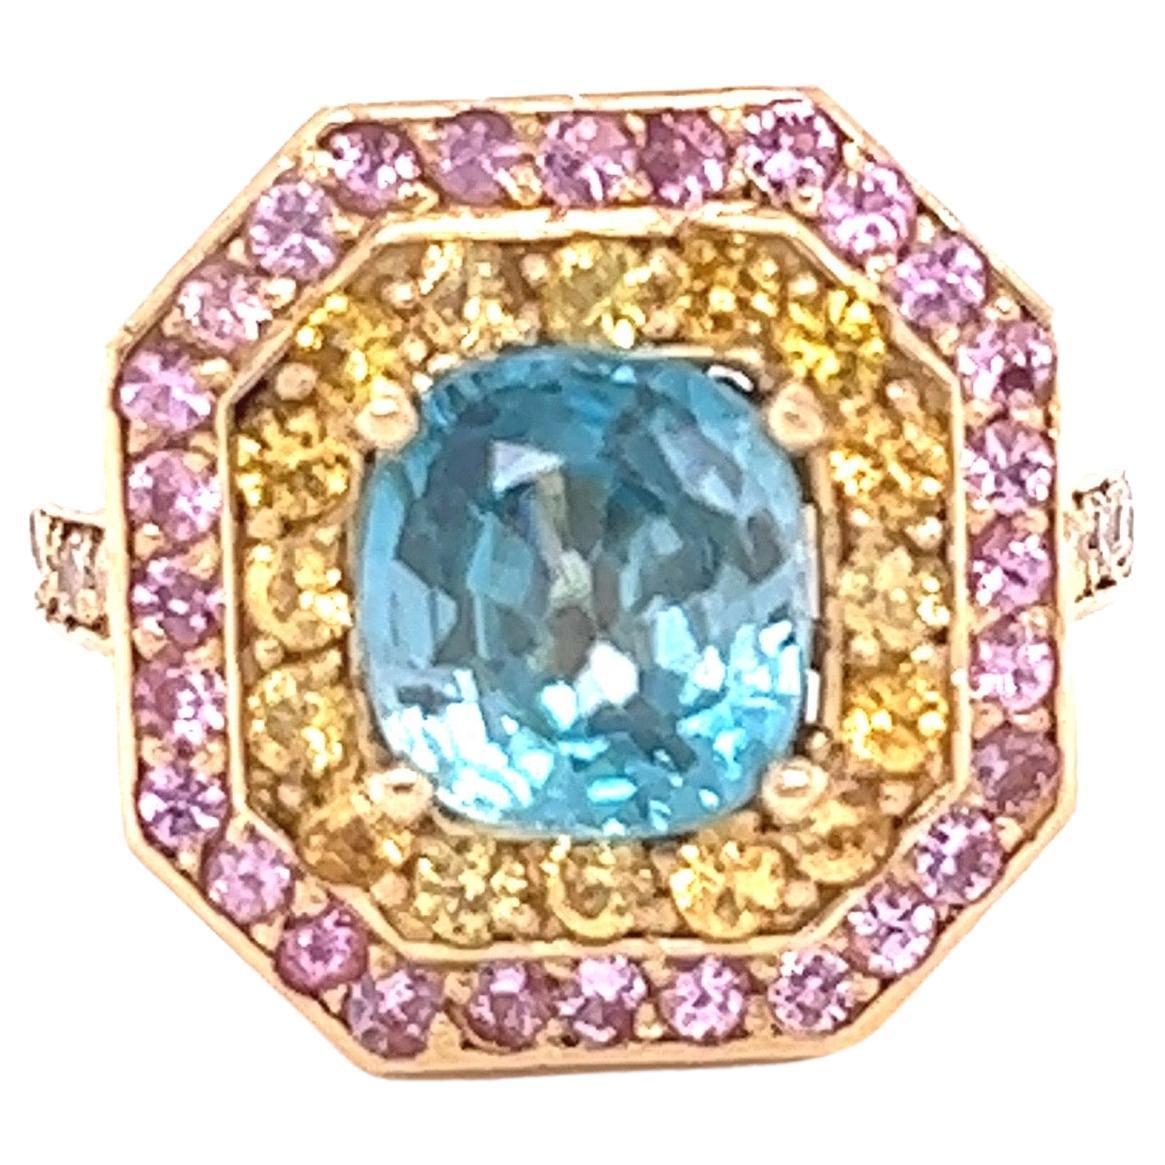 Blue Zircon is a natural stone mined mainly in Sri Lanka, Myanmar, and Australia.  
This ring has a beautiful Natural Cushion Cut Blue Zircon that weighs 3.31 carats and is surrounded by 28 Natural Pink Sapphires that weigh 0.61 Carats and 16